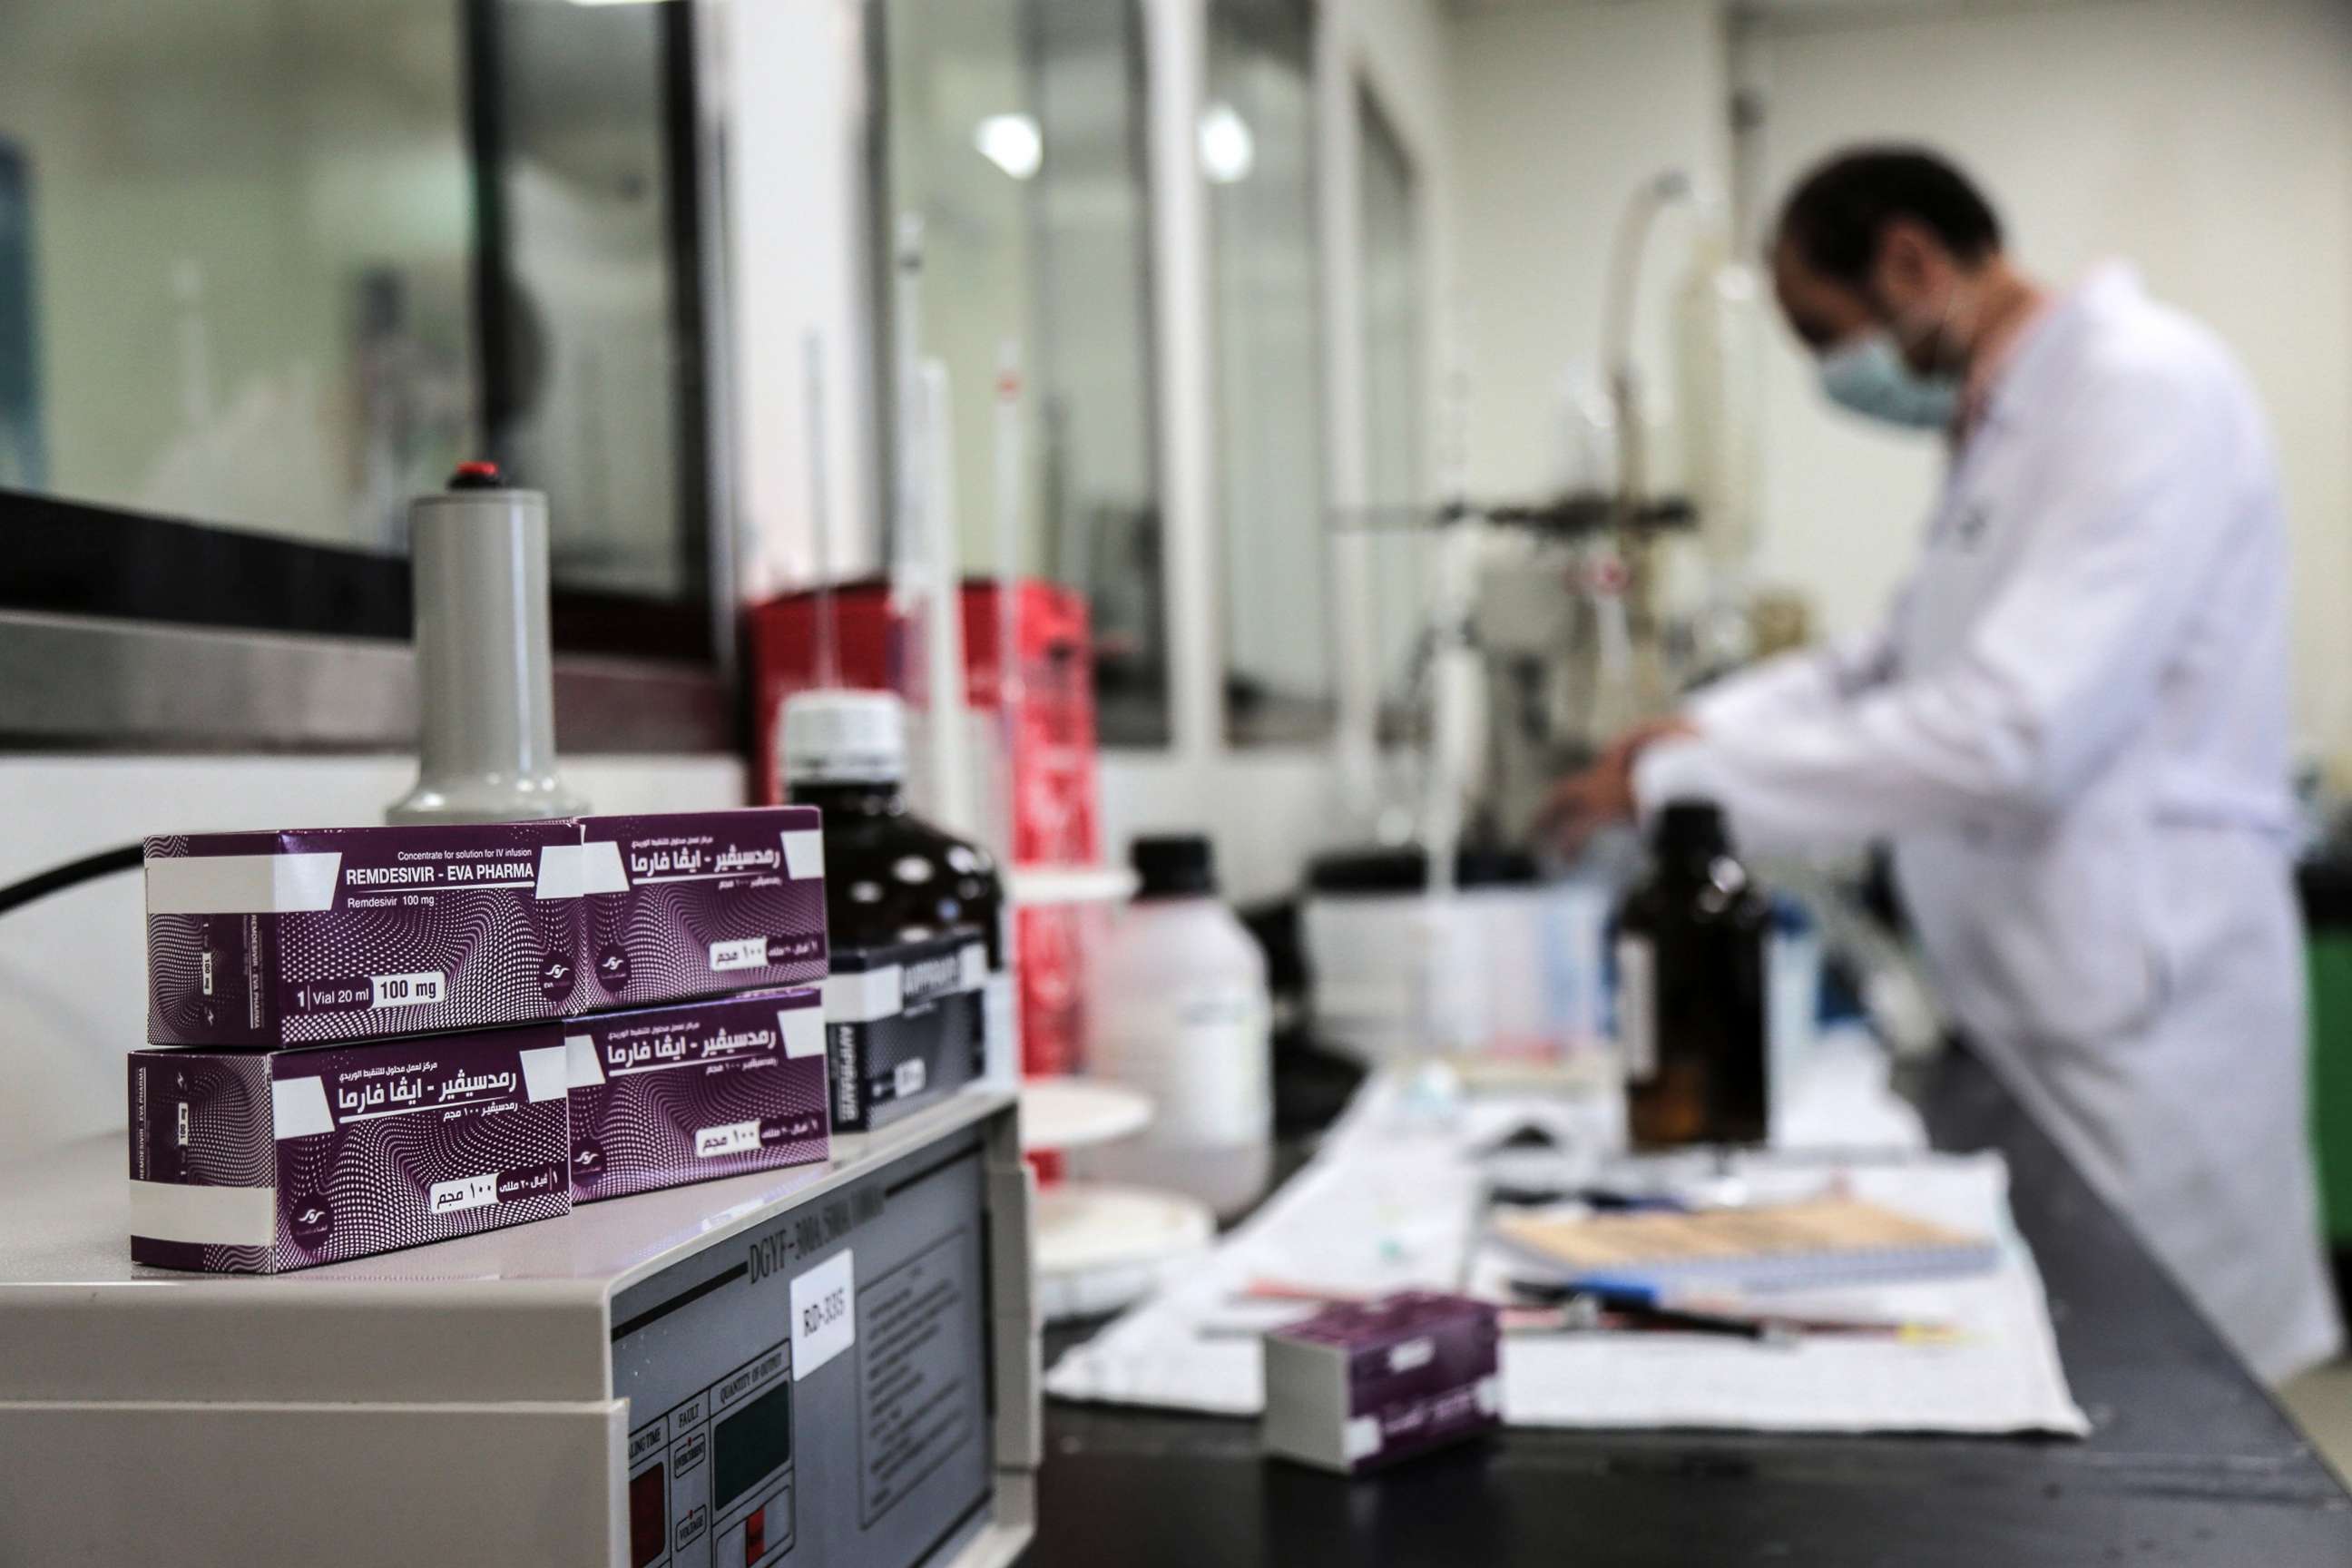 PHOTO: In this June 29, 2020, file photo, packs containing vials of Remdesivir, a broad-spectrum antiviral medication approved as a specific treatment for COVID-19, lie next to an employee of Eva Pharma at the company's factory in Giza, Egypt.